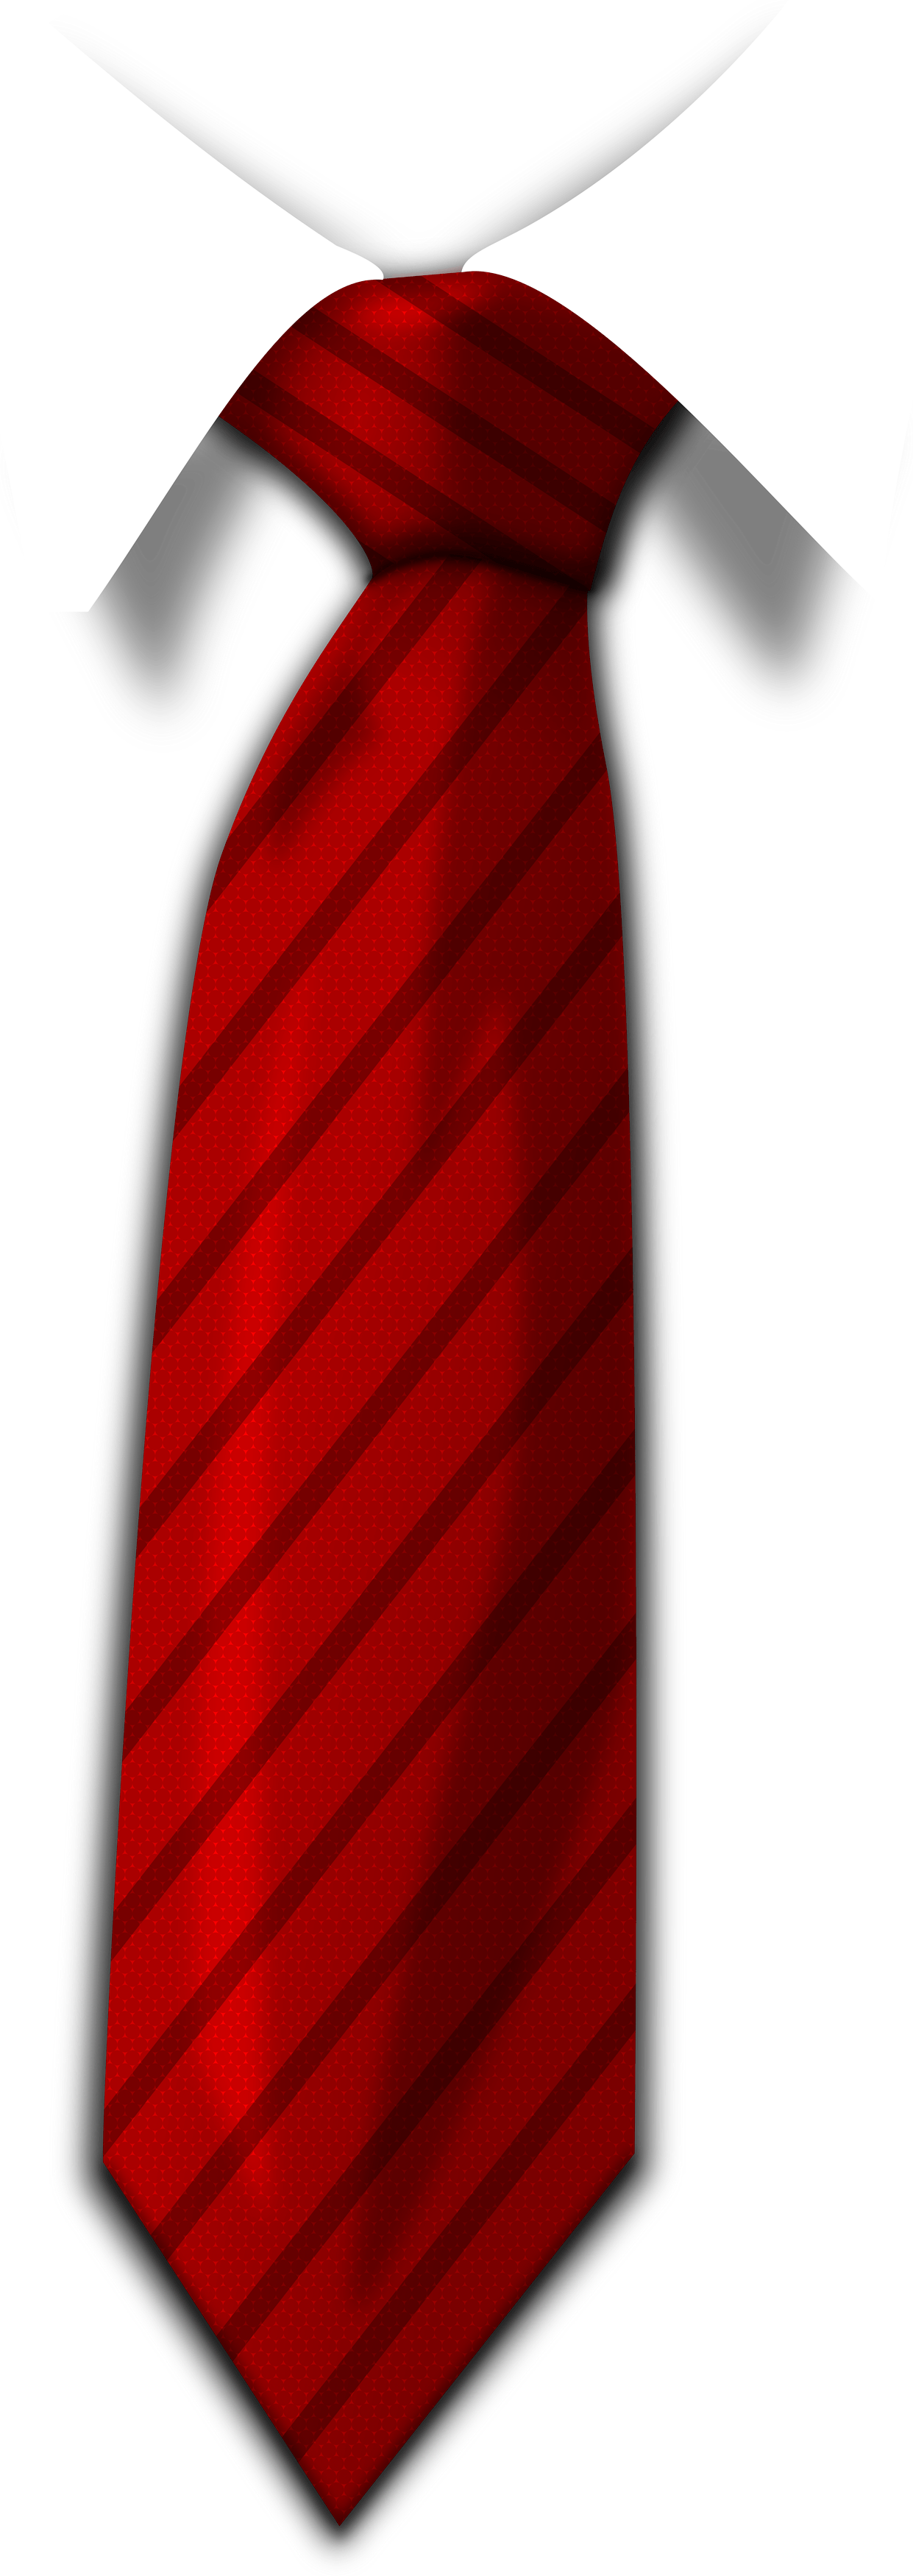 Red Tie PNG Images HD